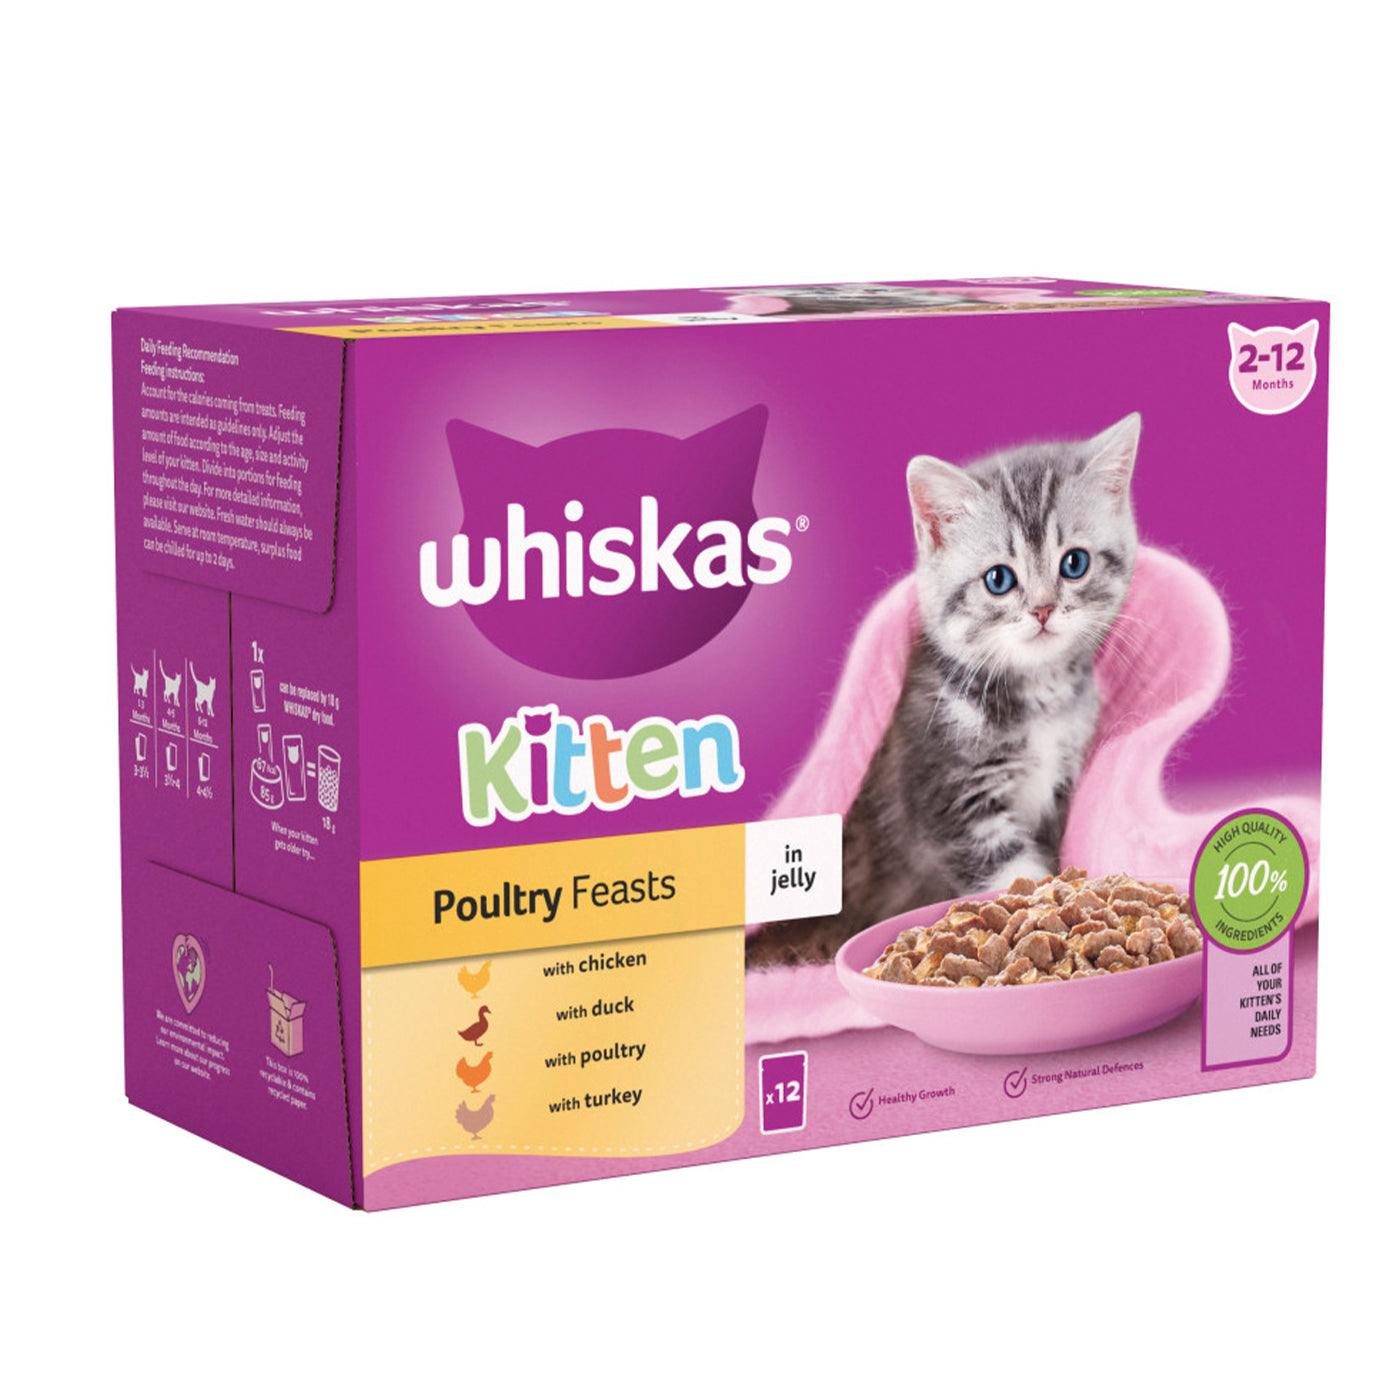 Whiskas 2-12 Months Kitten Poultry Feasts in Jelly (12x85g)